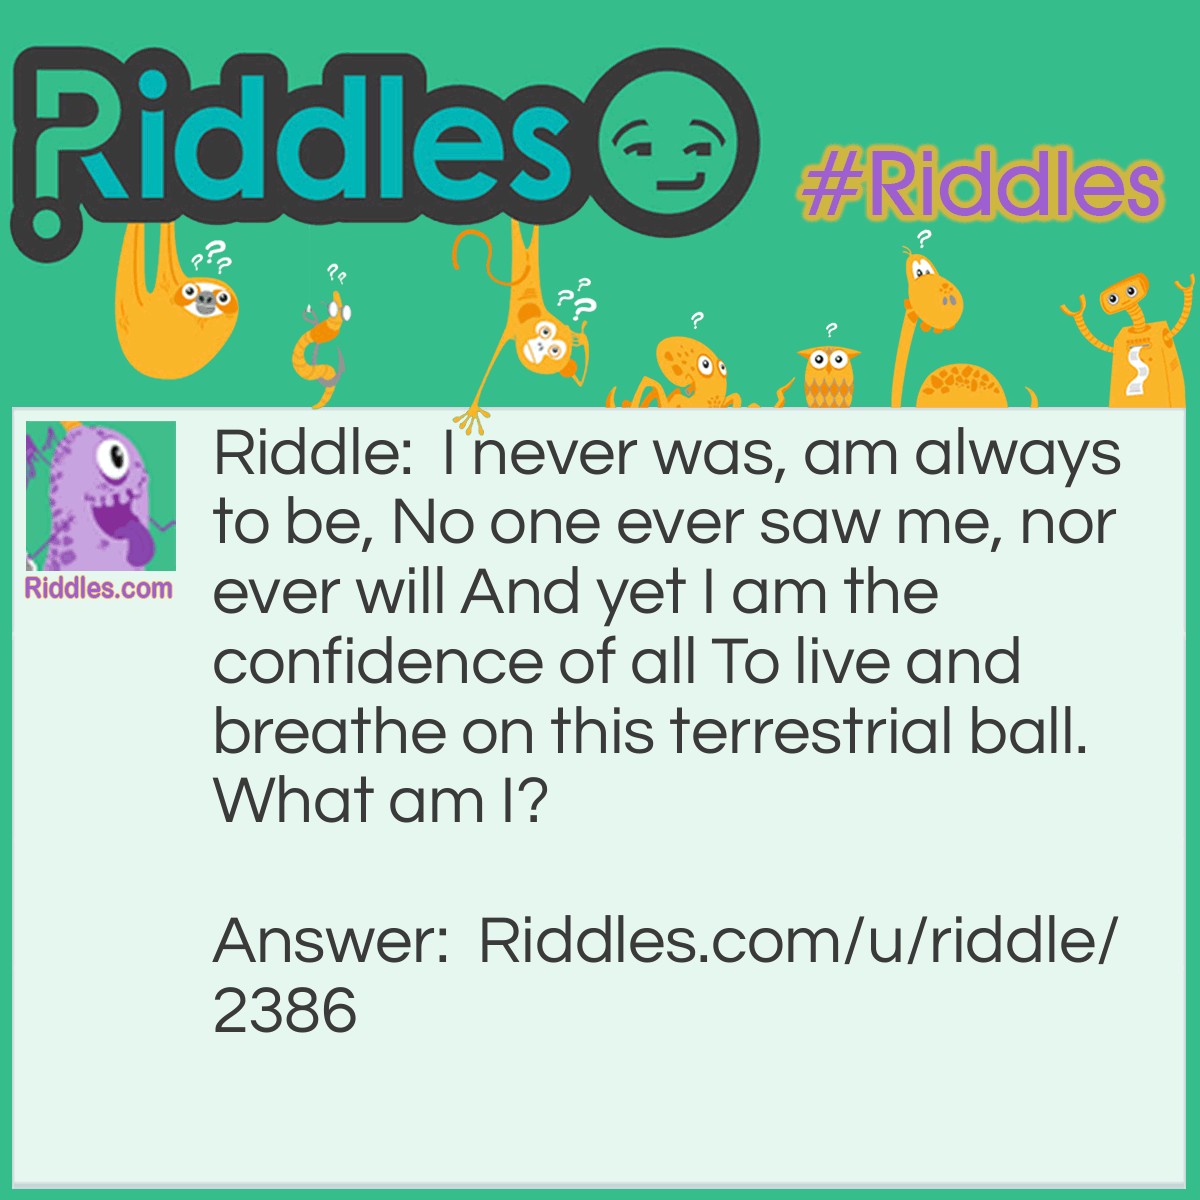 Riddle: I never was, am always to be, No one ever saw me, nor ever will And yet I am the confidence of all To live and breathe on this terrestrial ball. What am I? Answer: Tomorrow.